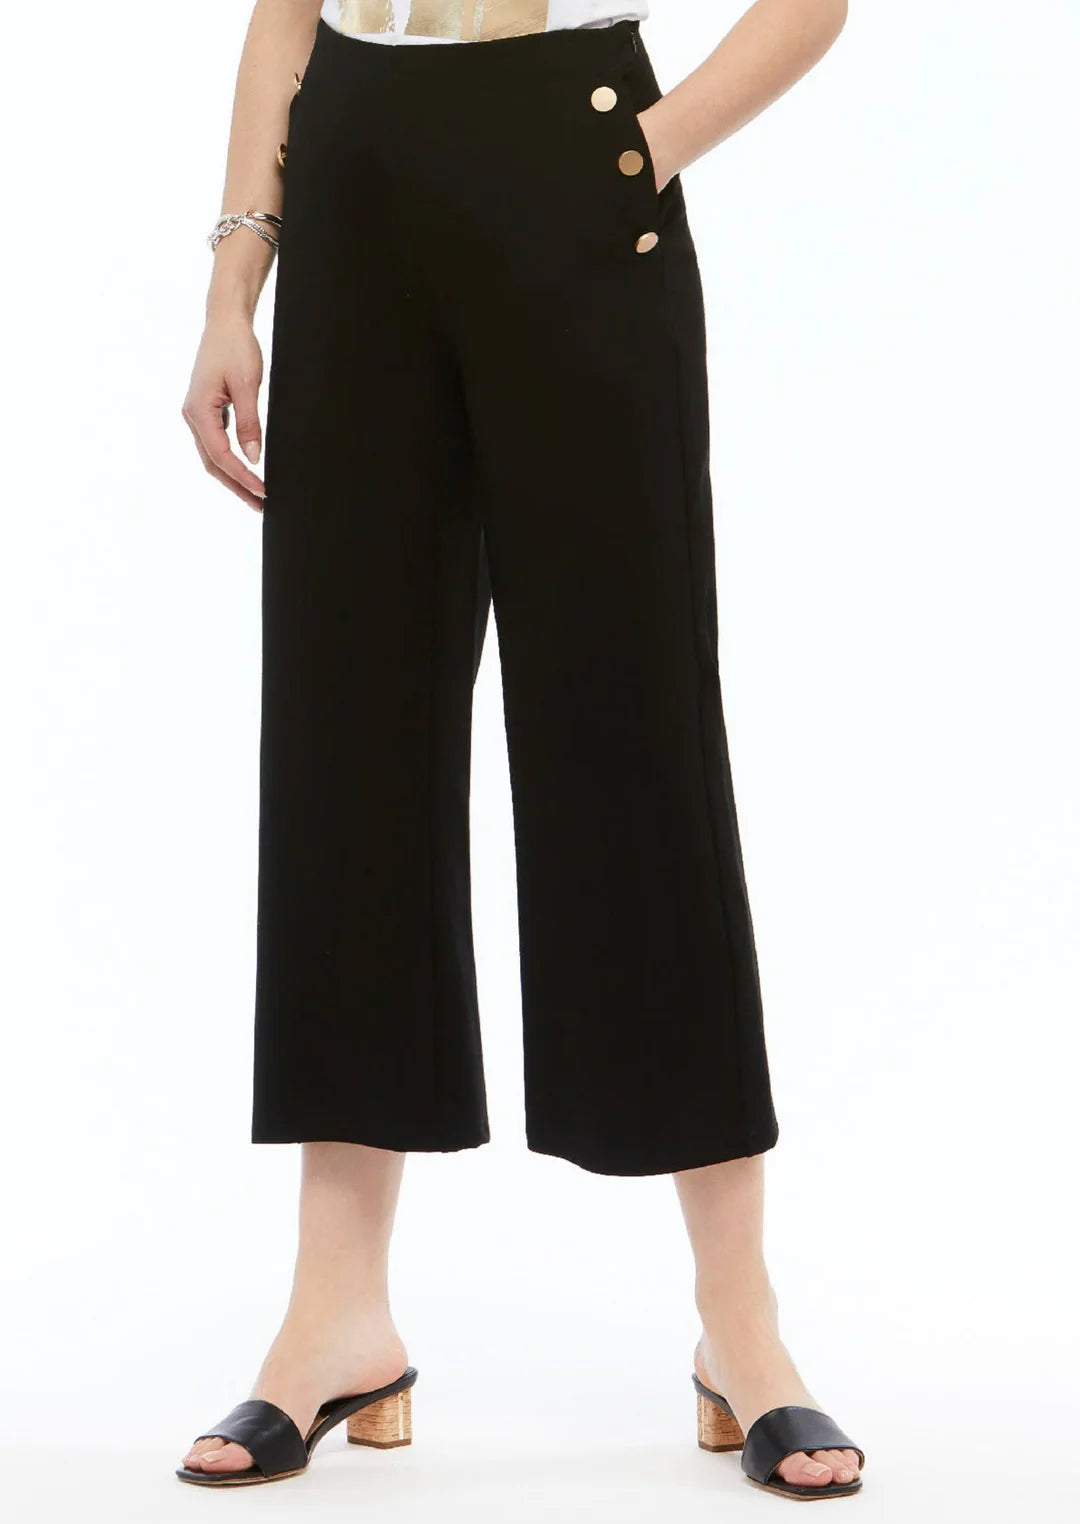 Gold Button Black Pull On Crop Pant